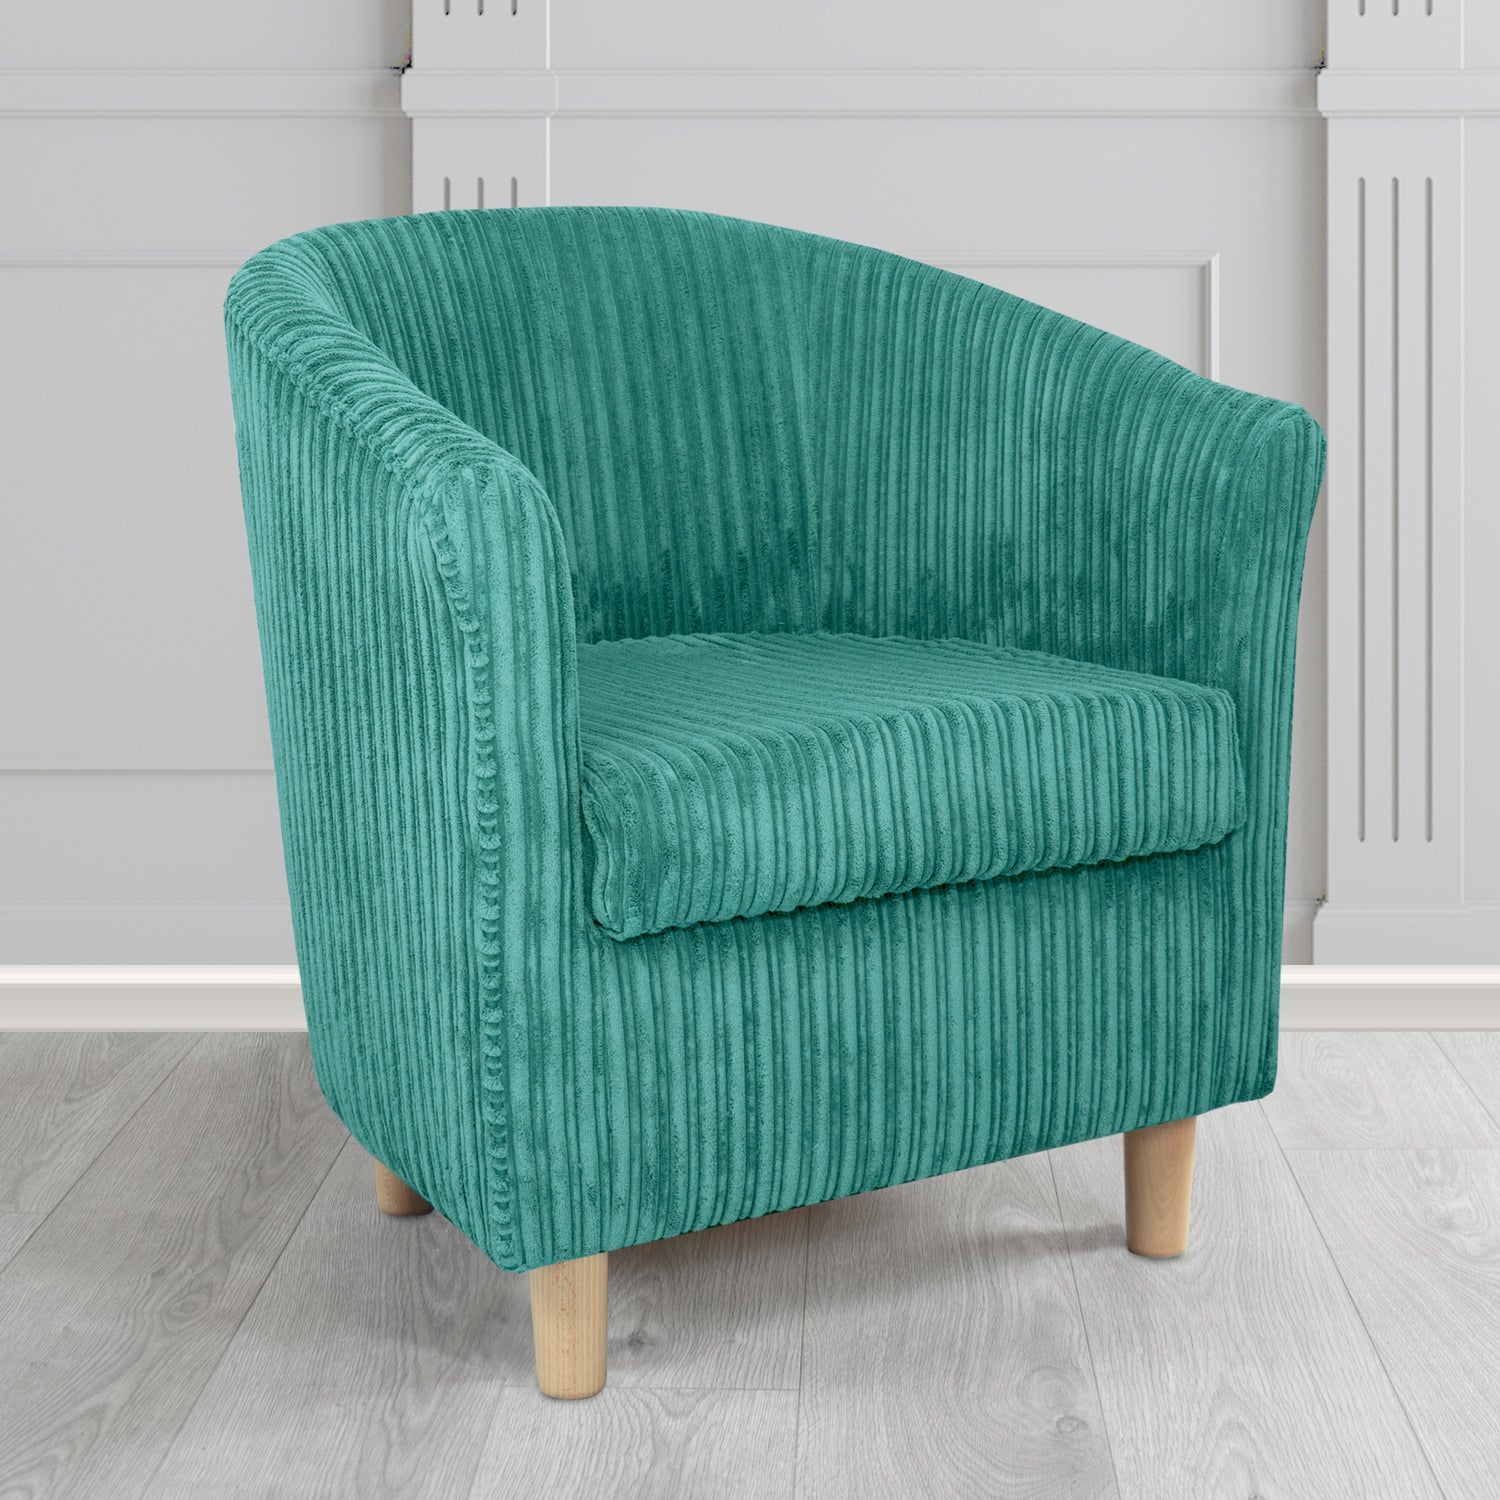 Tuscany in Conway Teal Plain Textured Fabric Tub Chair (6581736144938)